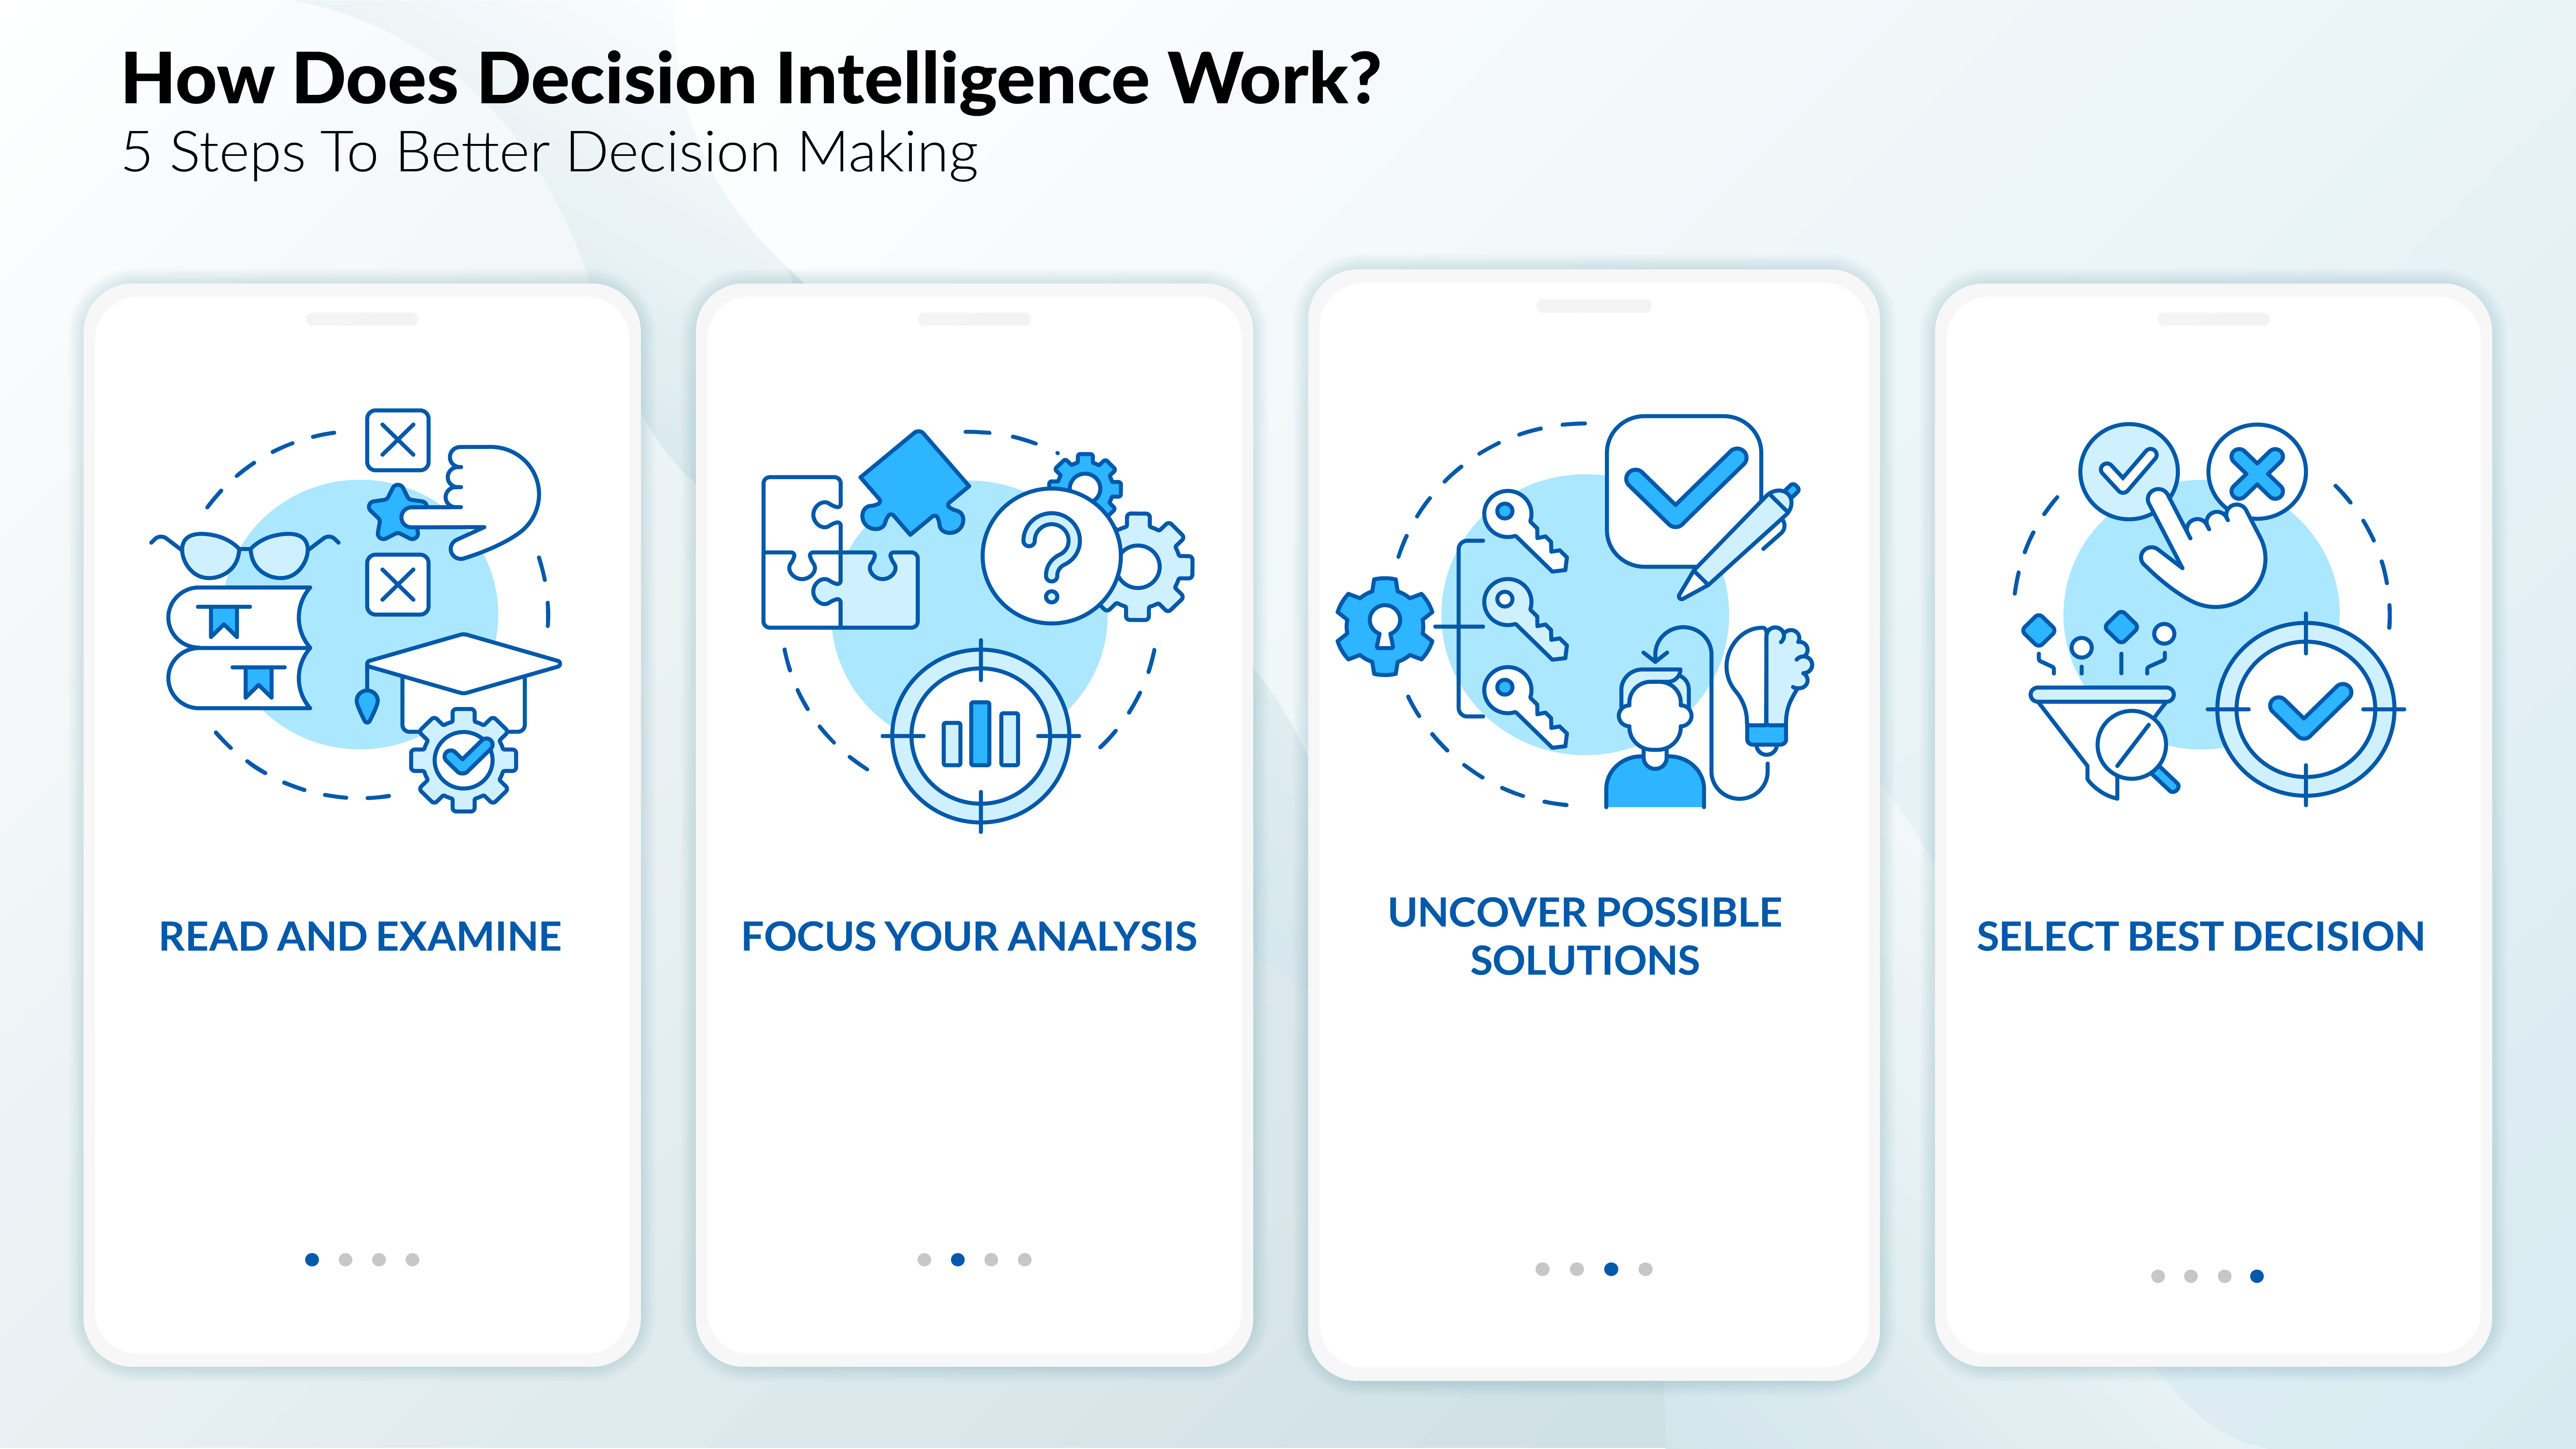 How Does Decision Intelligence Work?